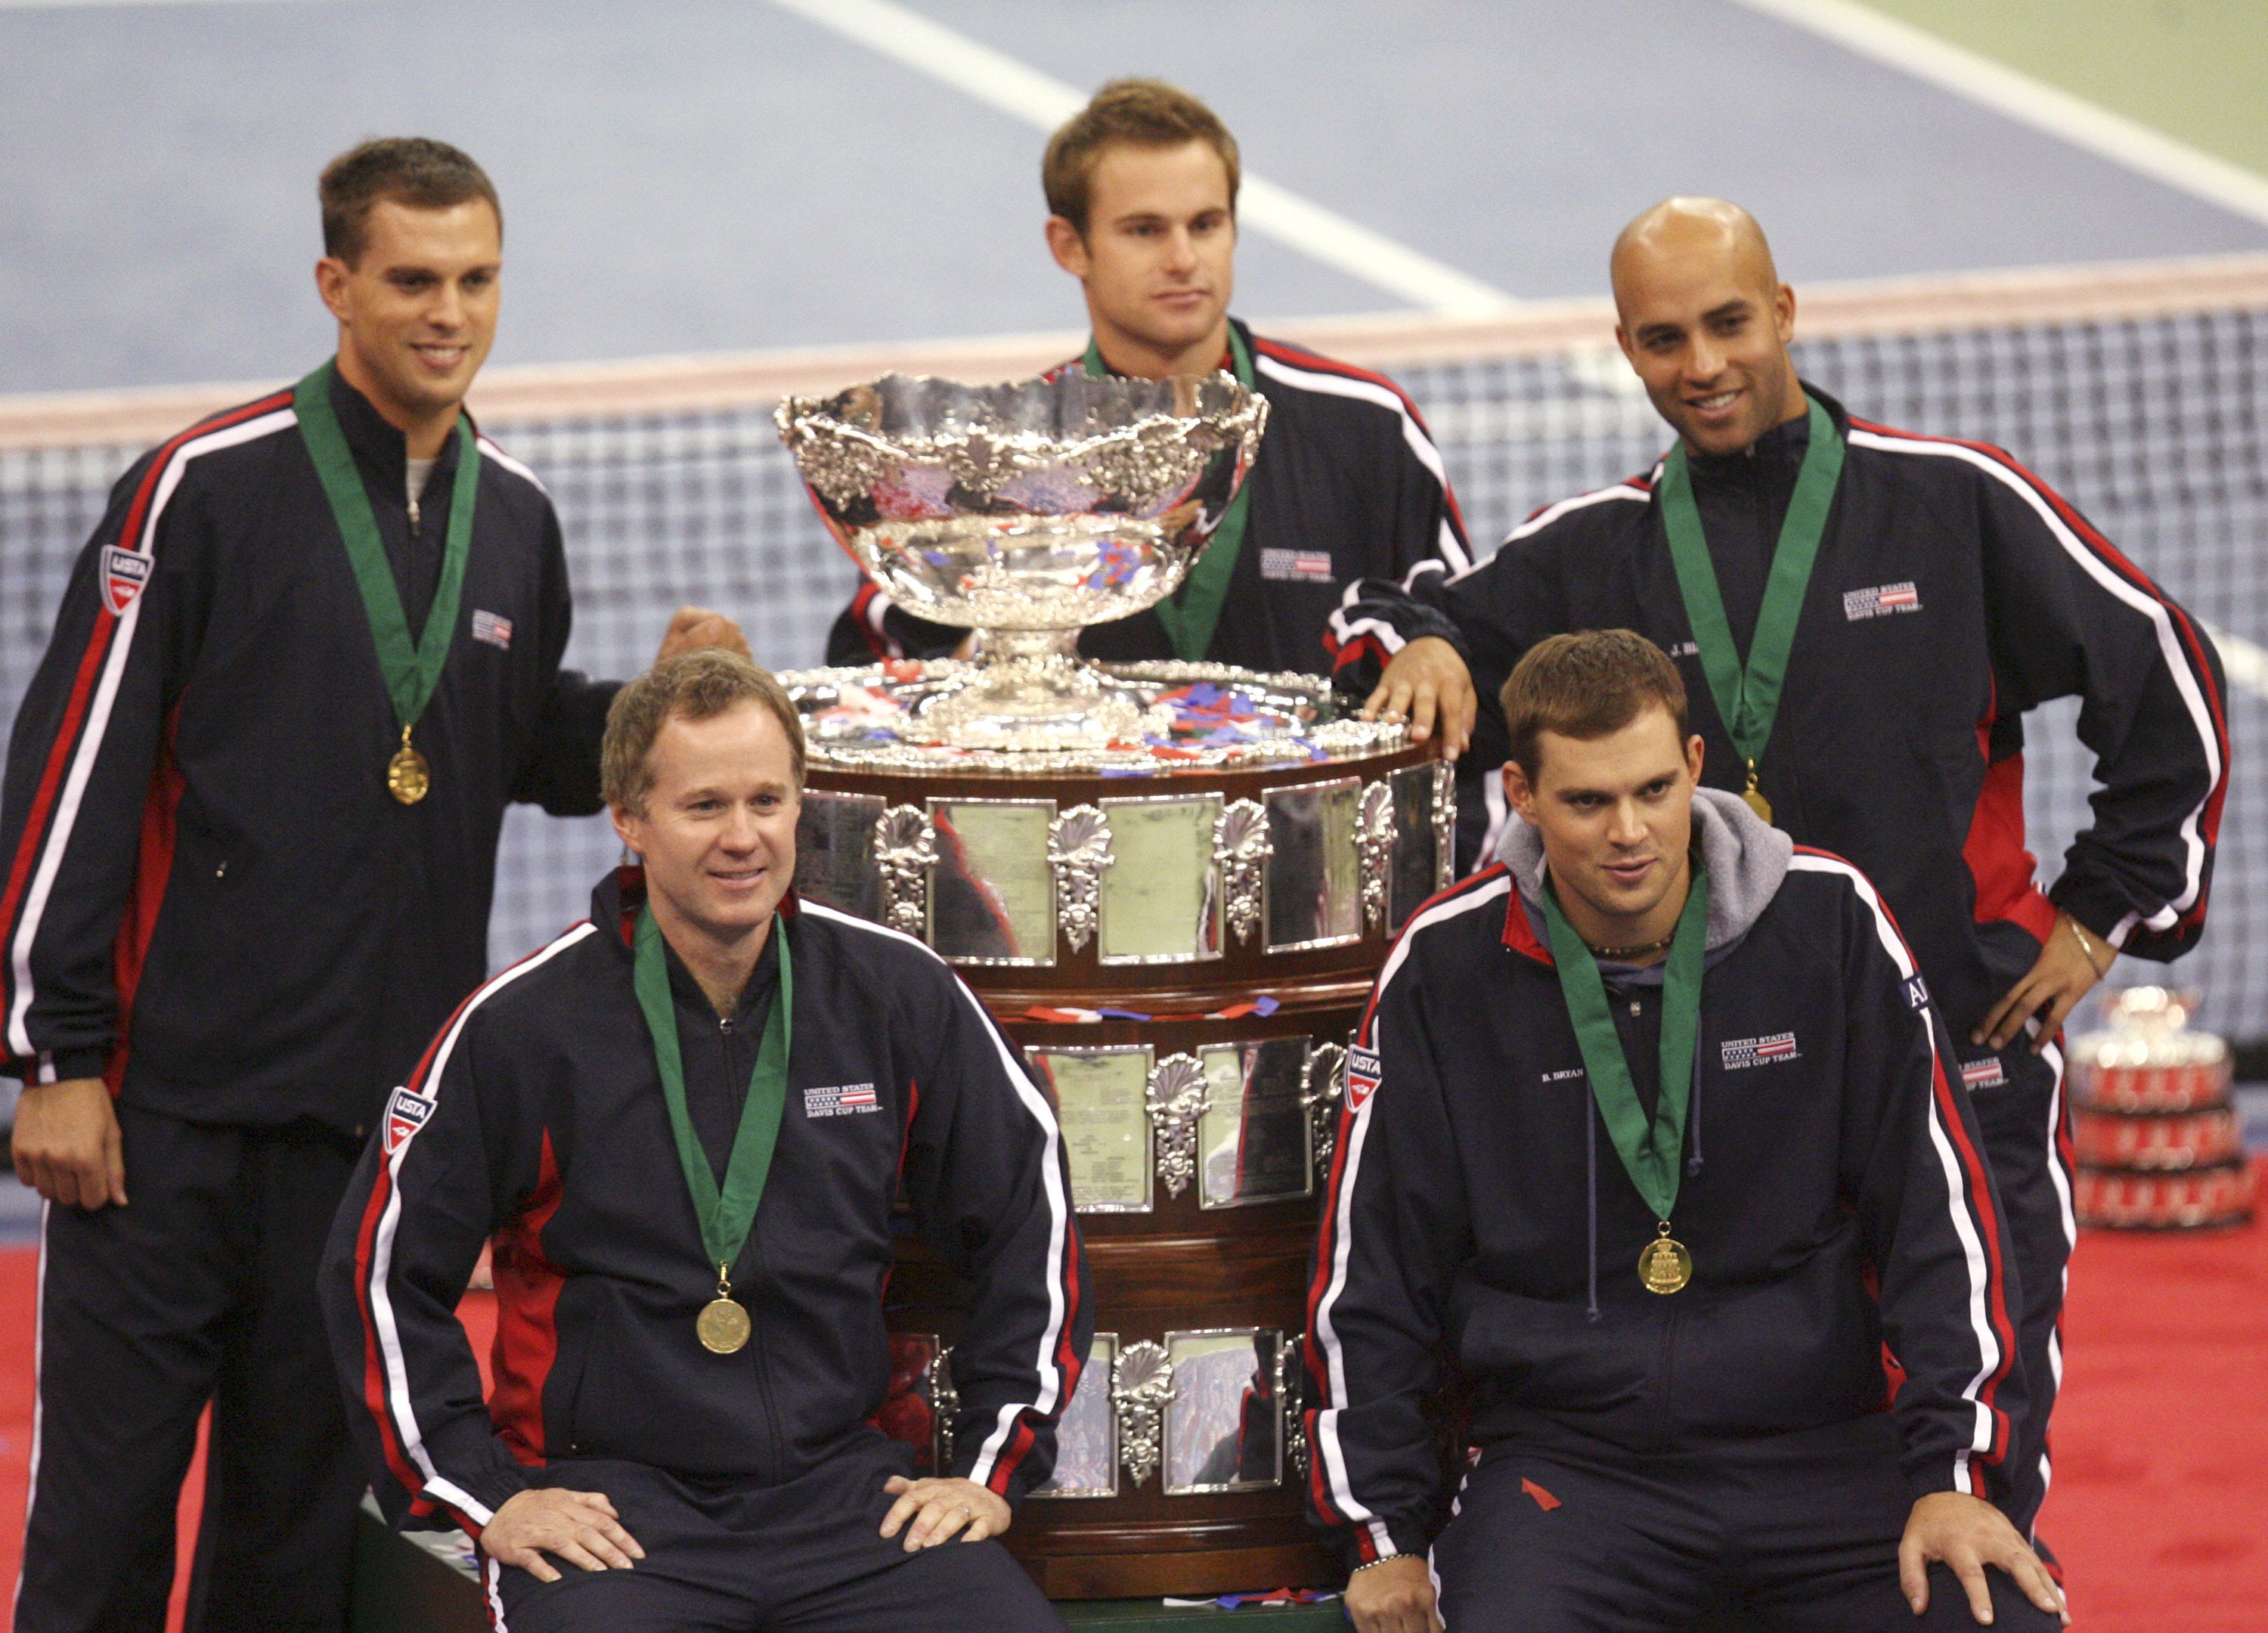 The last time the U.S. Davis Cup team played in the area was 2007 when Mike Bryan, Andy Roddick, James Blake, left to right front, captain Patrick McEnroe and Bob Bryan won the Davis Cup title over Russia at the Memorial Coliseum.